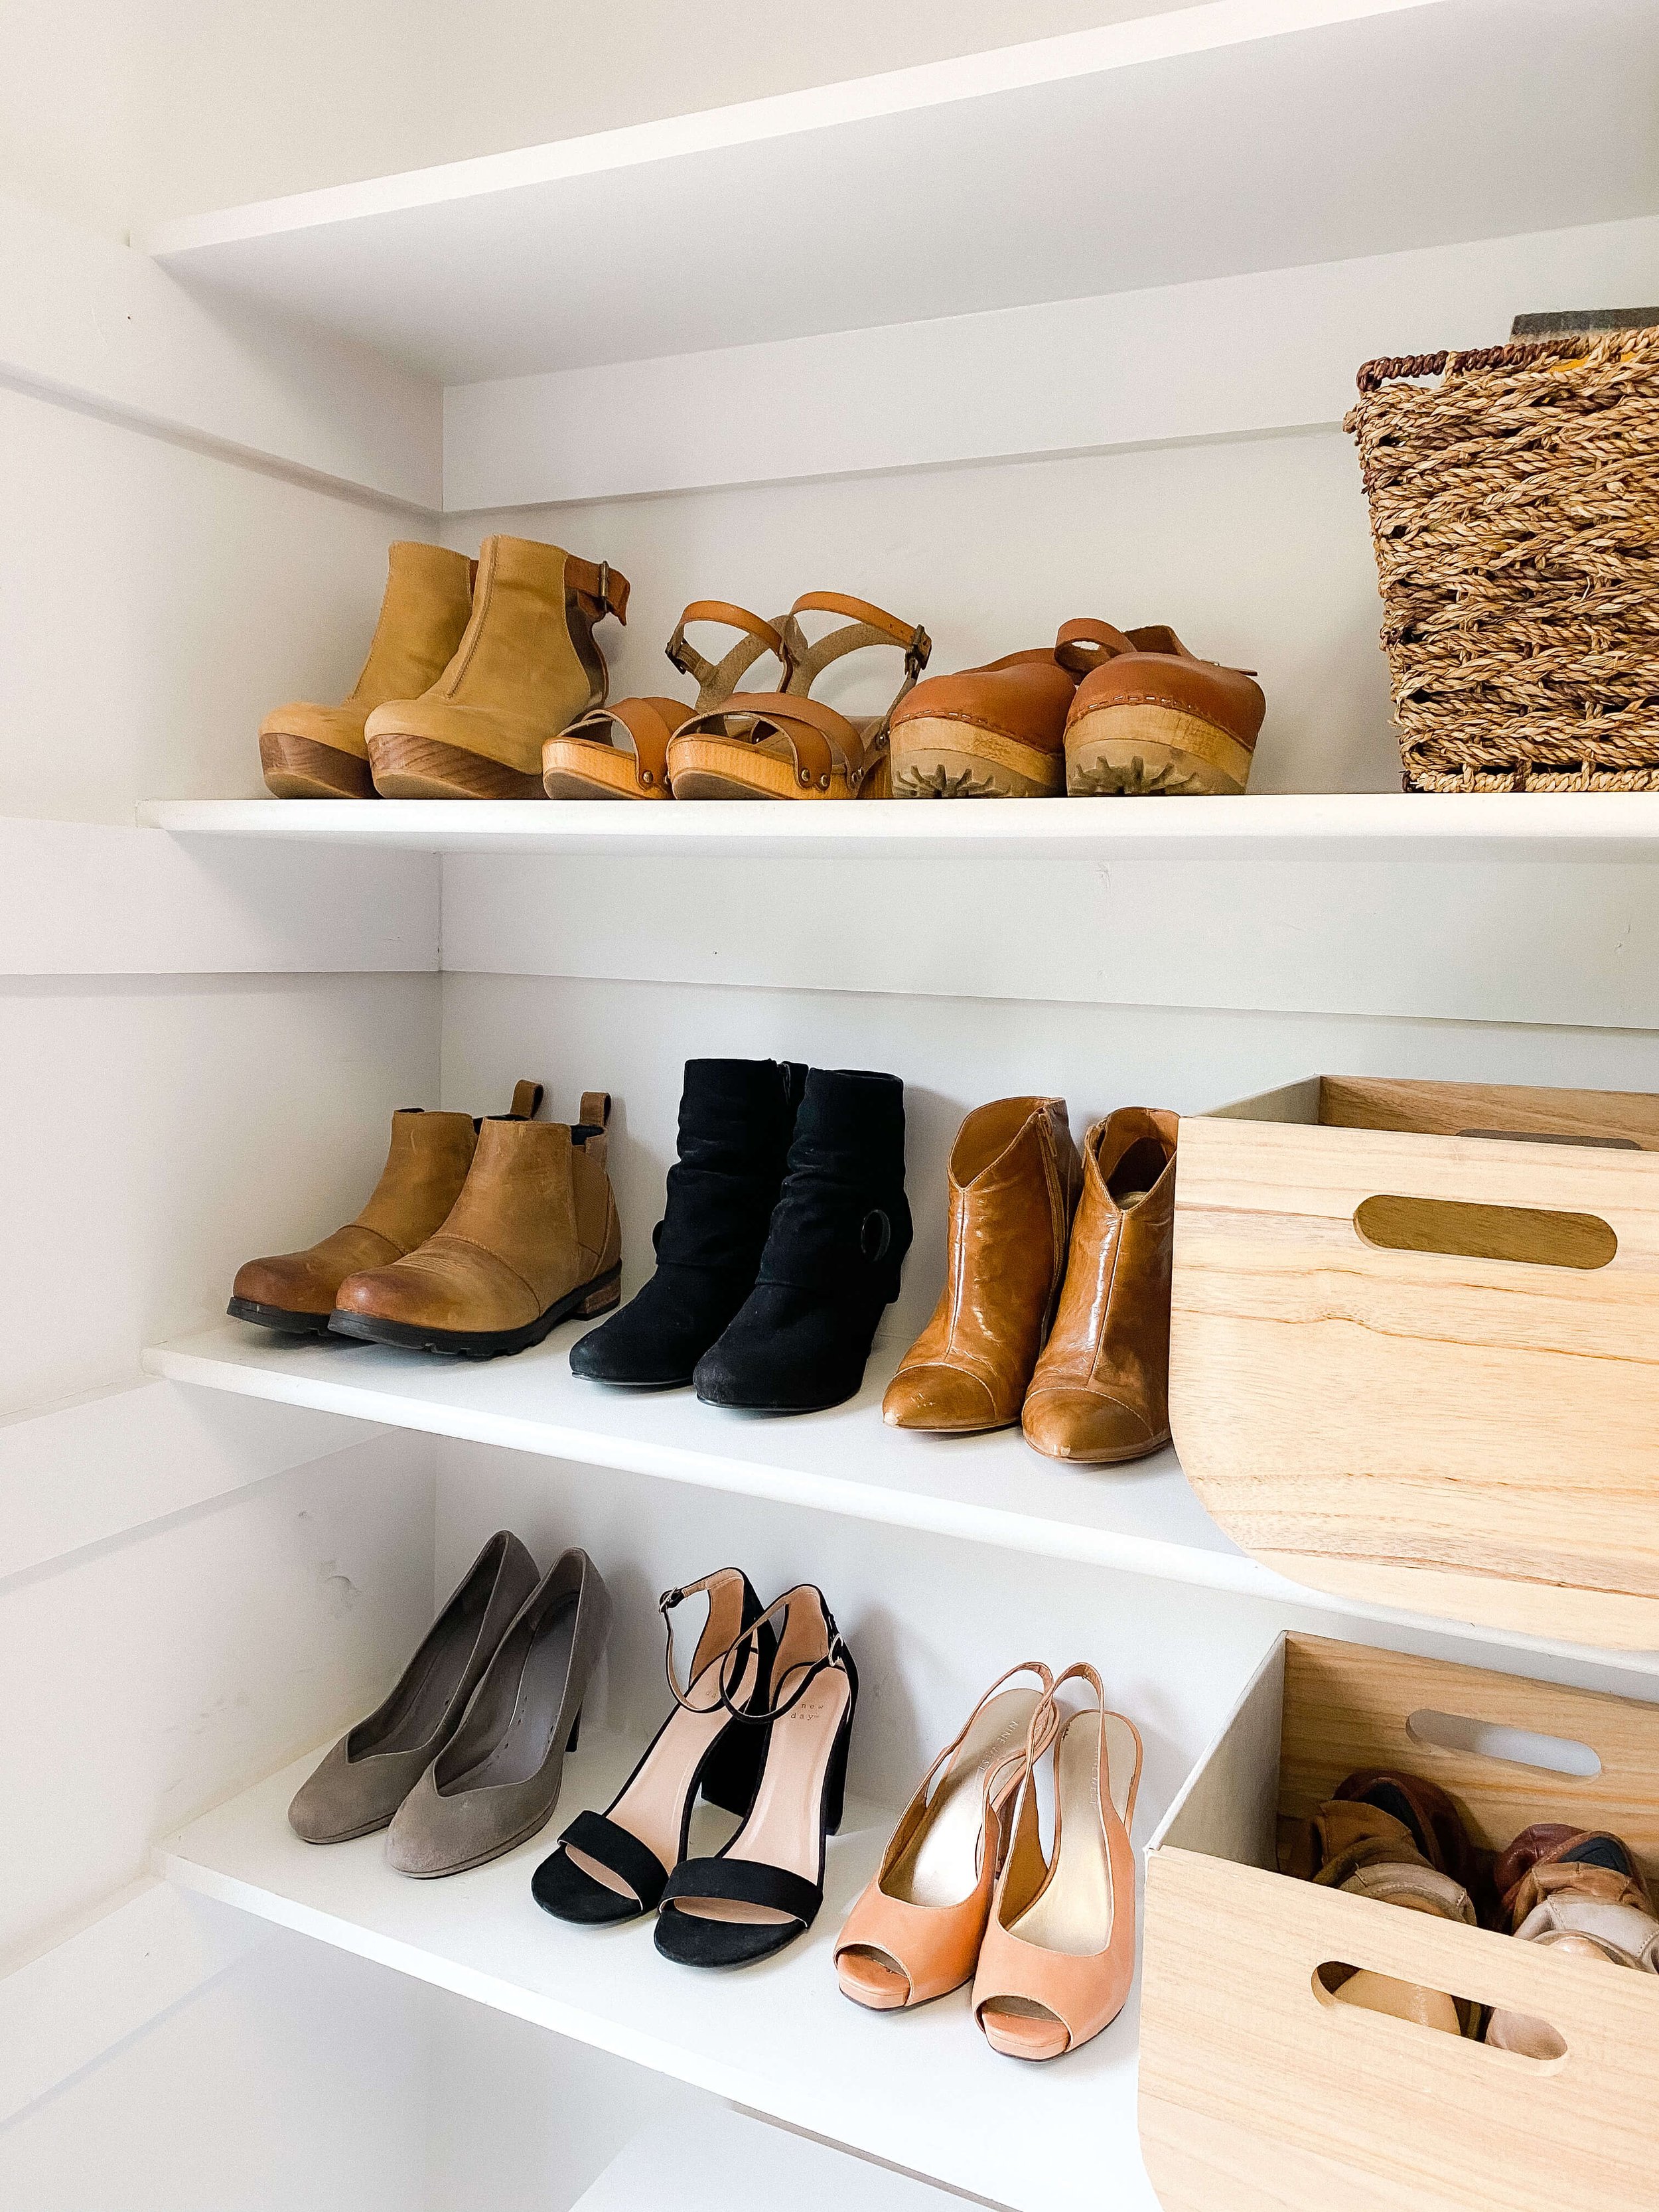 Styled Shoes In An Organized Closet